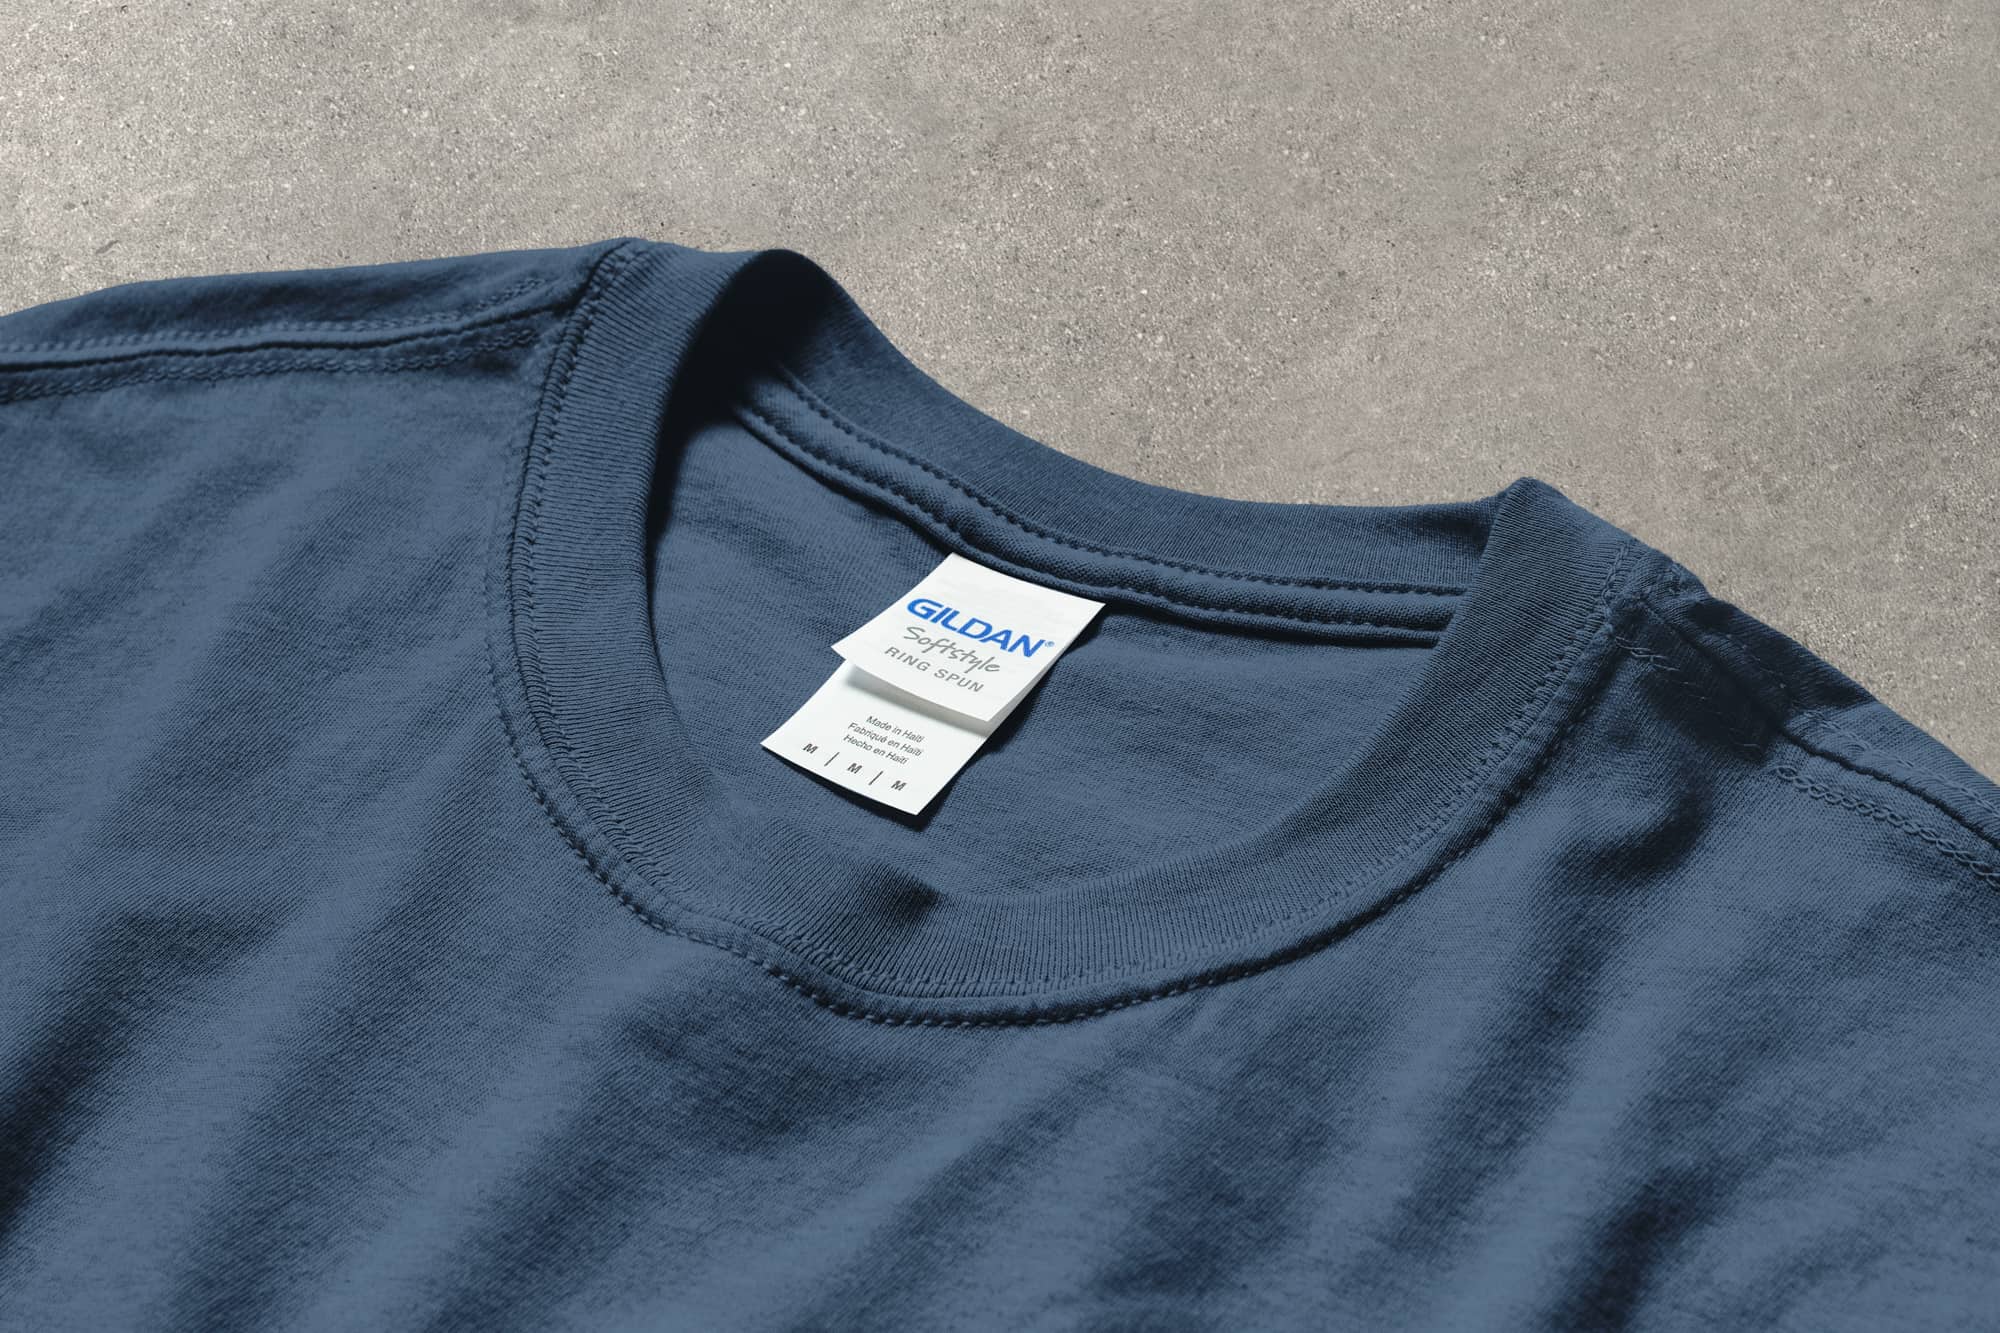 Detail image of the collar ad tag of the Gildan Softstyle T-Shirt